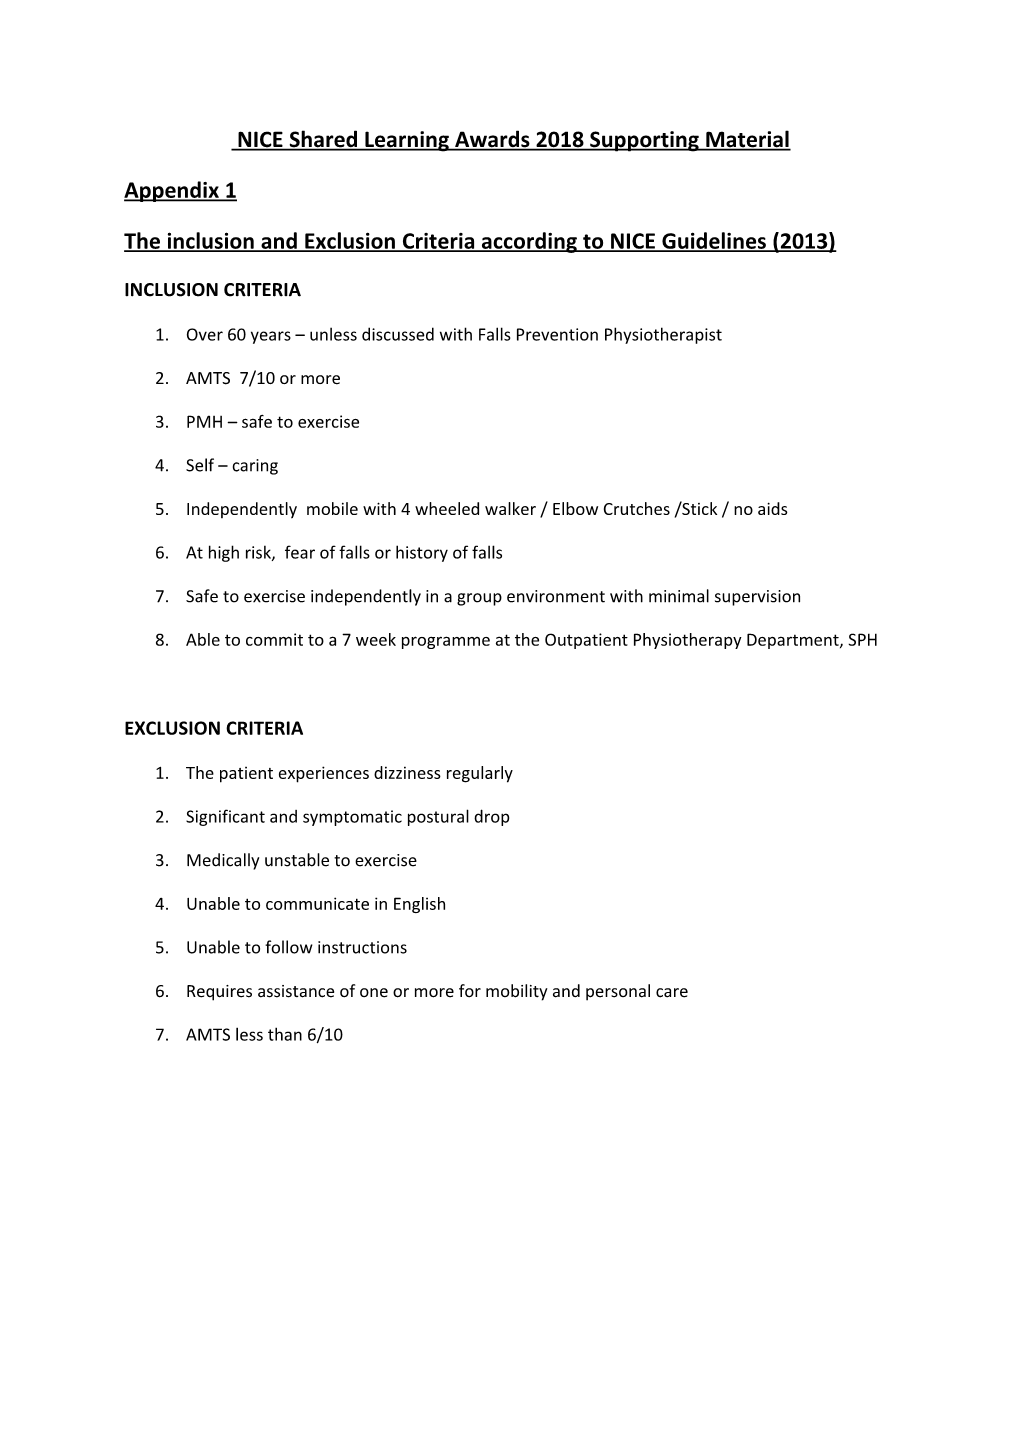 The Inclusion and Exclusion Criteria According to NICE Guidelines (2013)